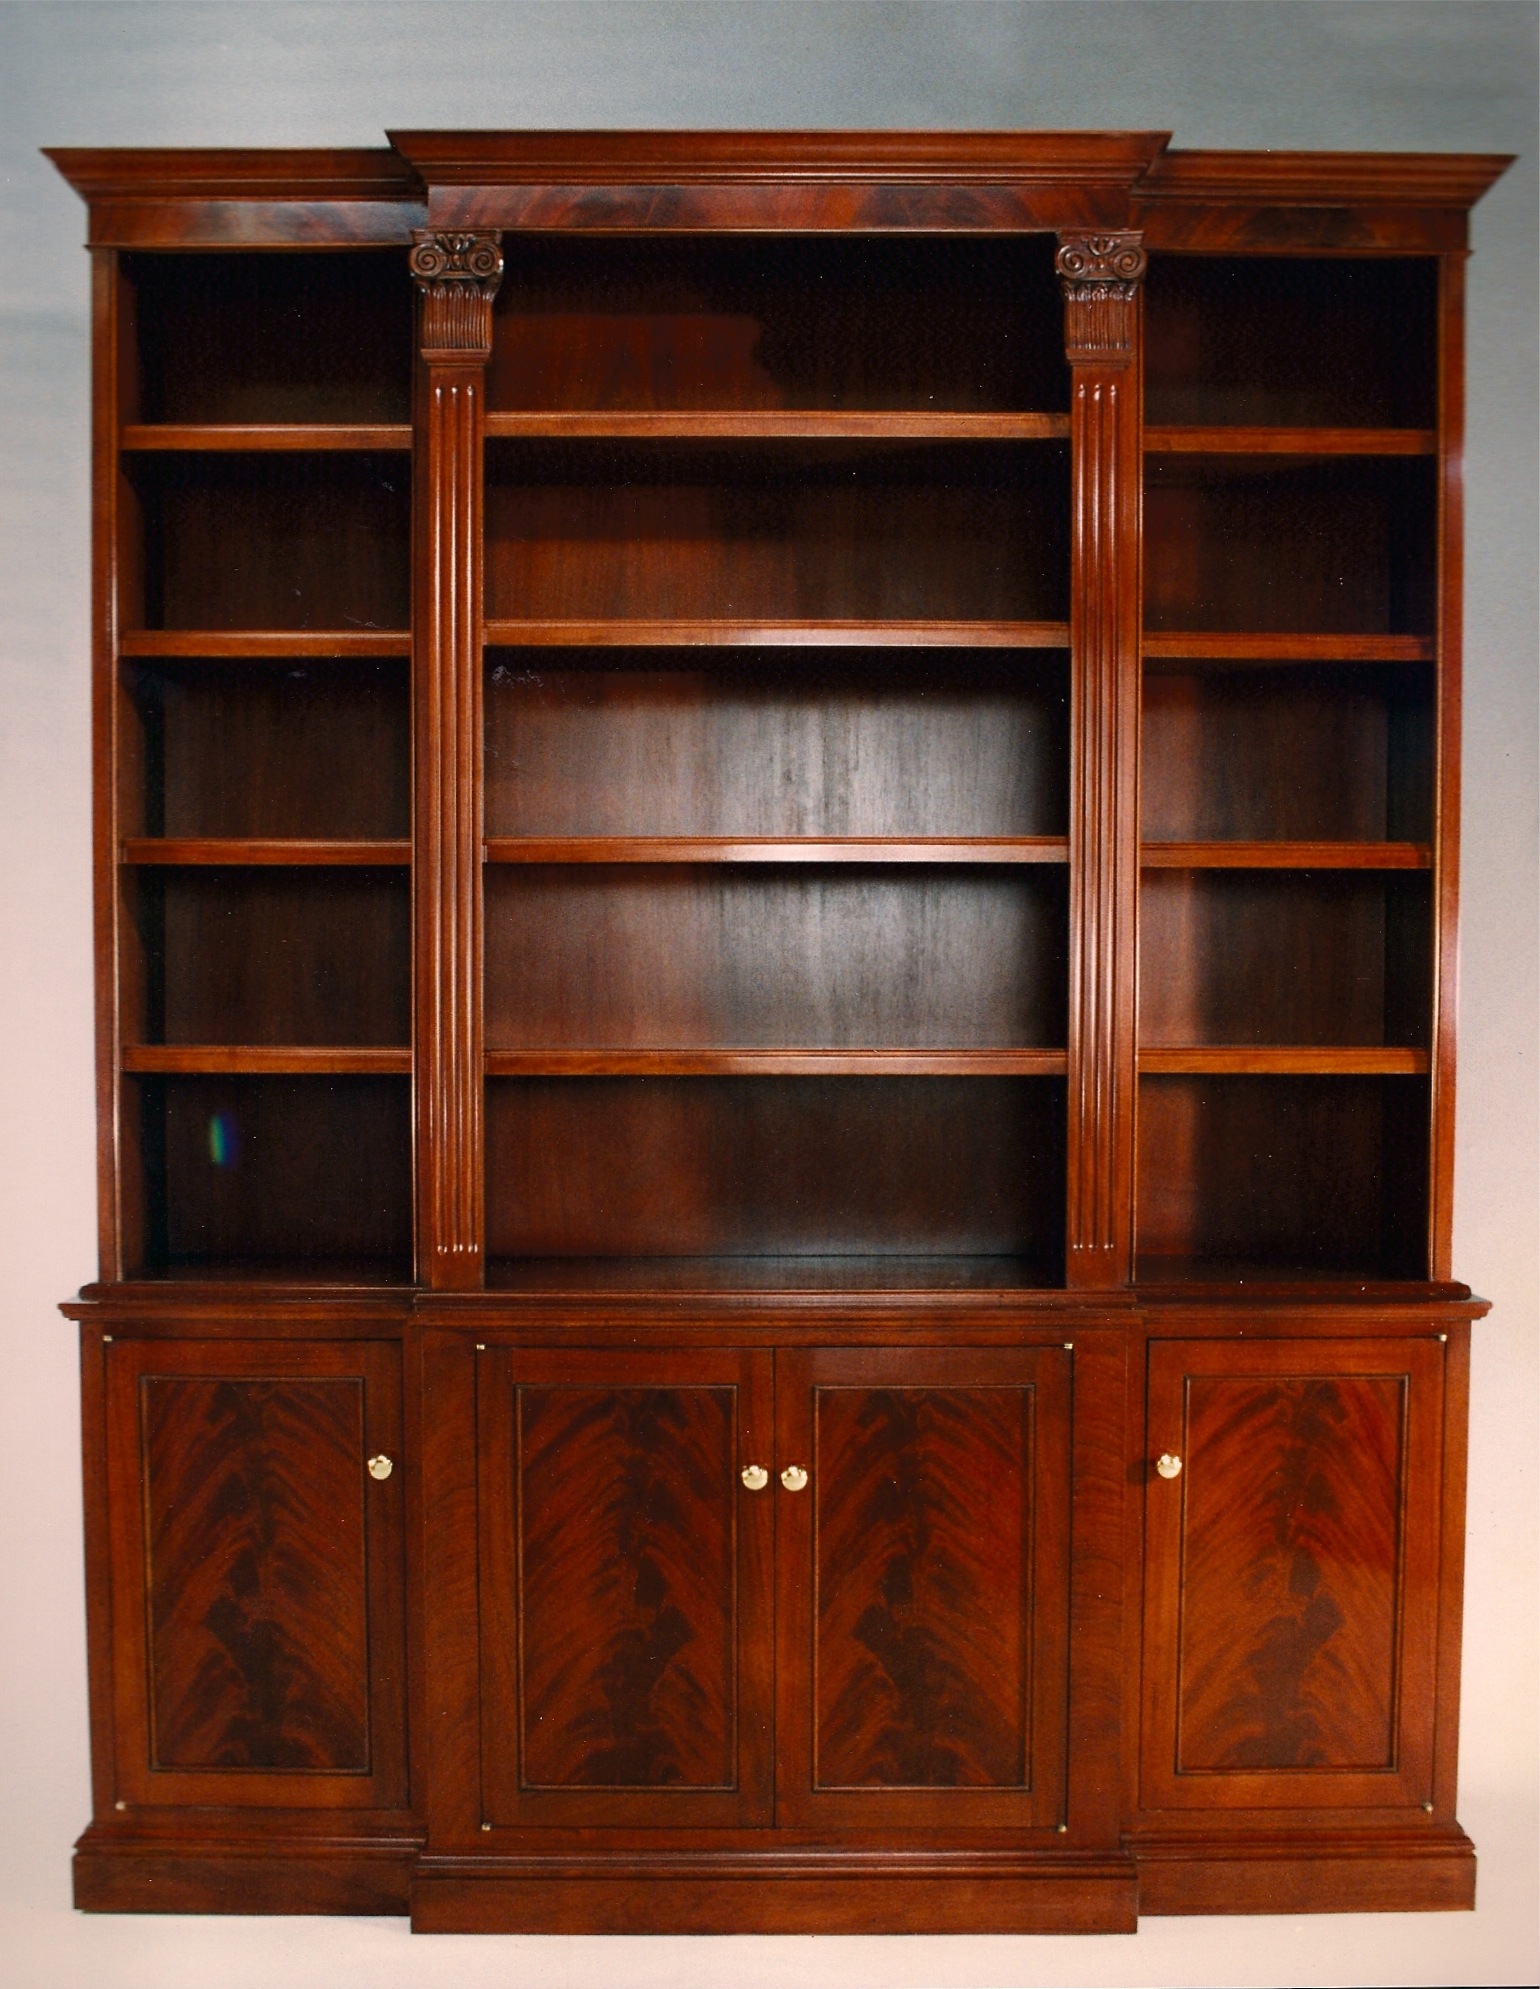 Traditional mahogany breakfront bookcase with hand-carved capitals and crotch veneer work.